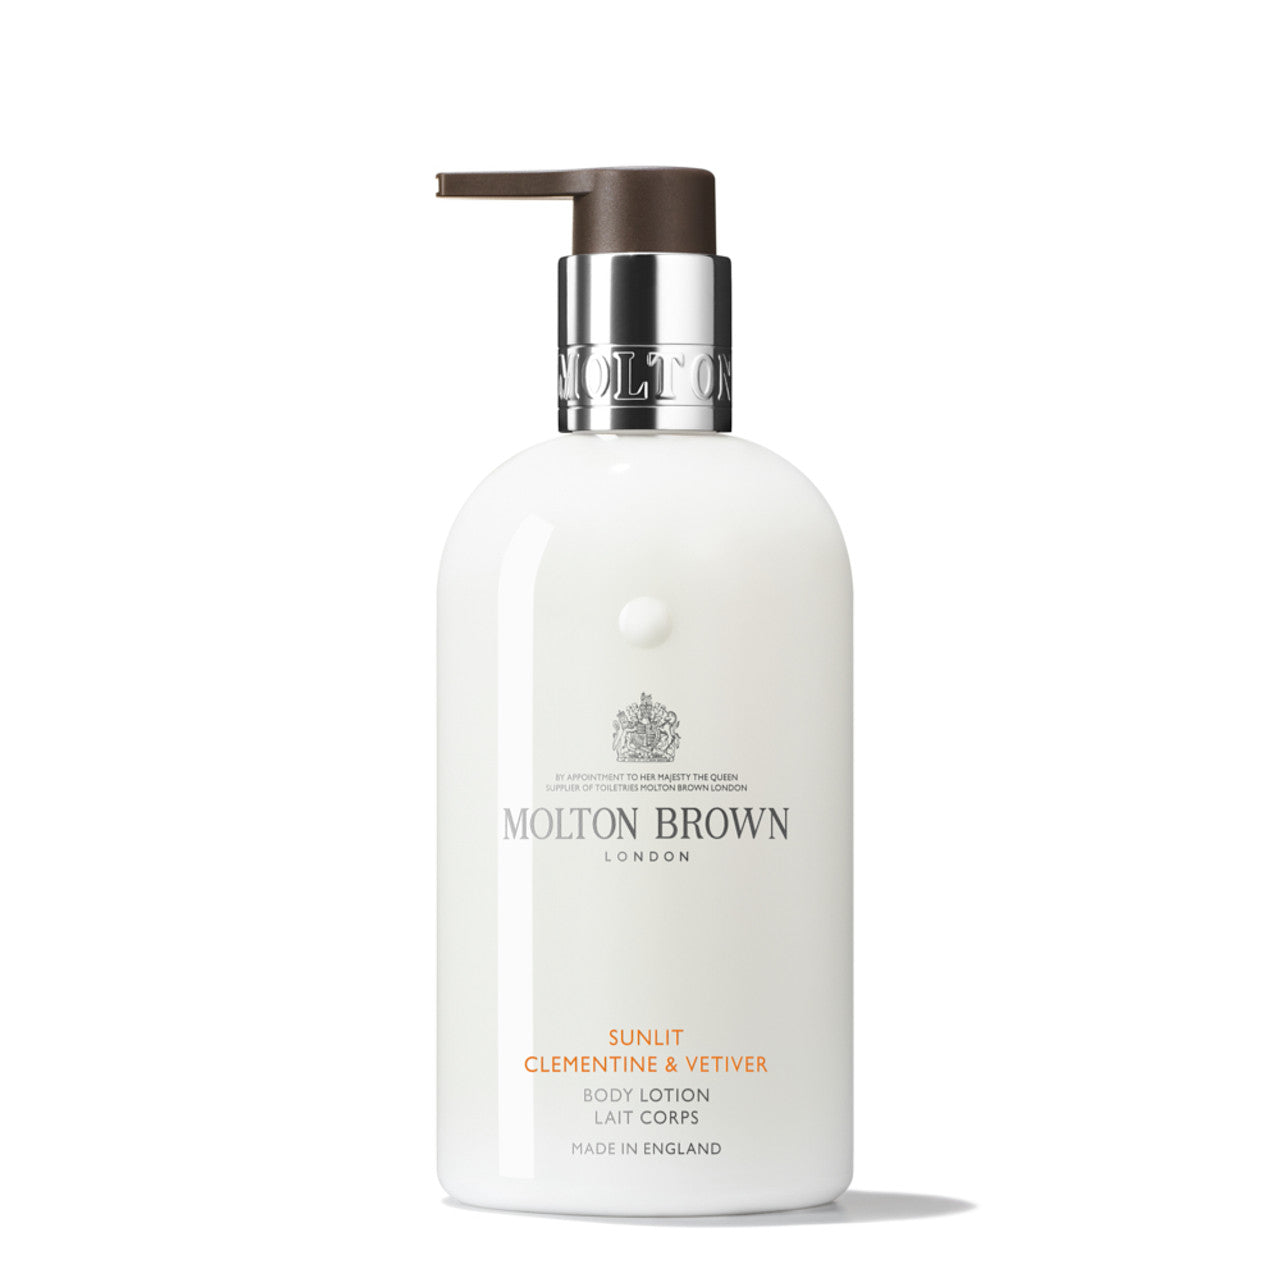 Sunlit Clementine & Vetiver - Body Lotion  - Molton Brown